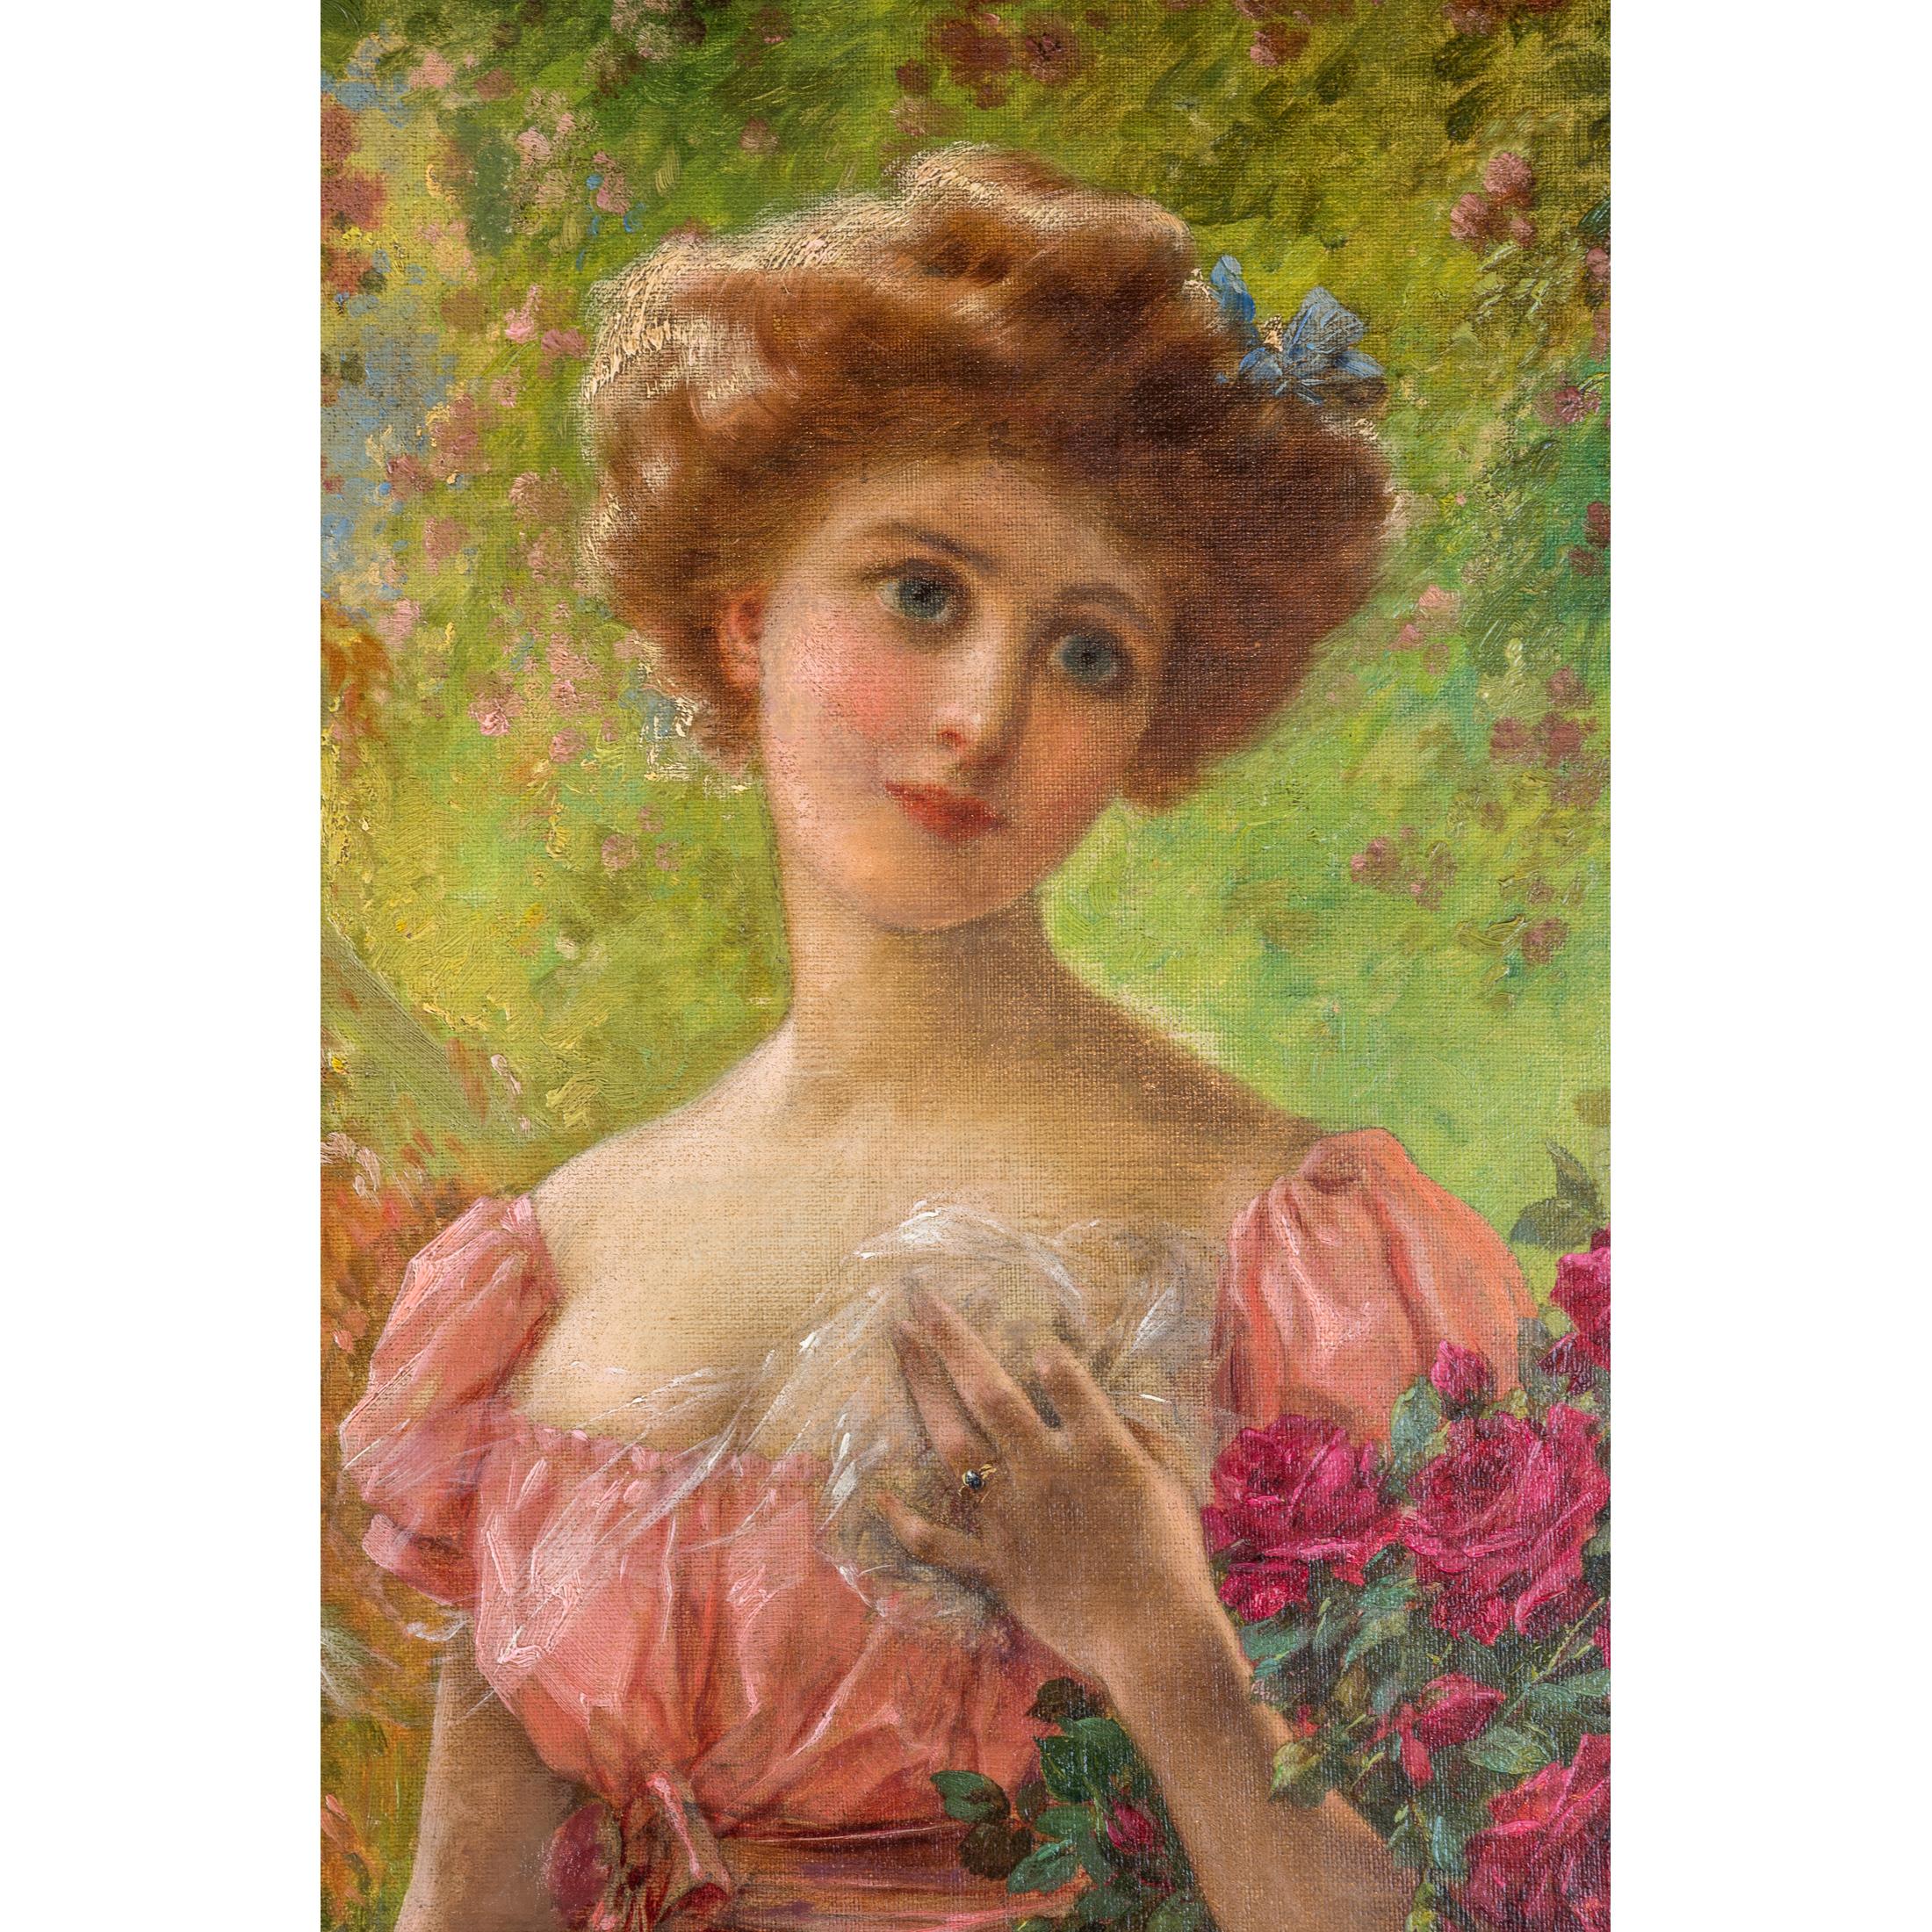 EMILE VERNON
French, (1872-1919))

Young Beauty with Roses

Signed E Vernon

Oil on canvas
30 x 13 inches 